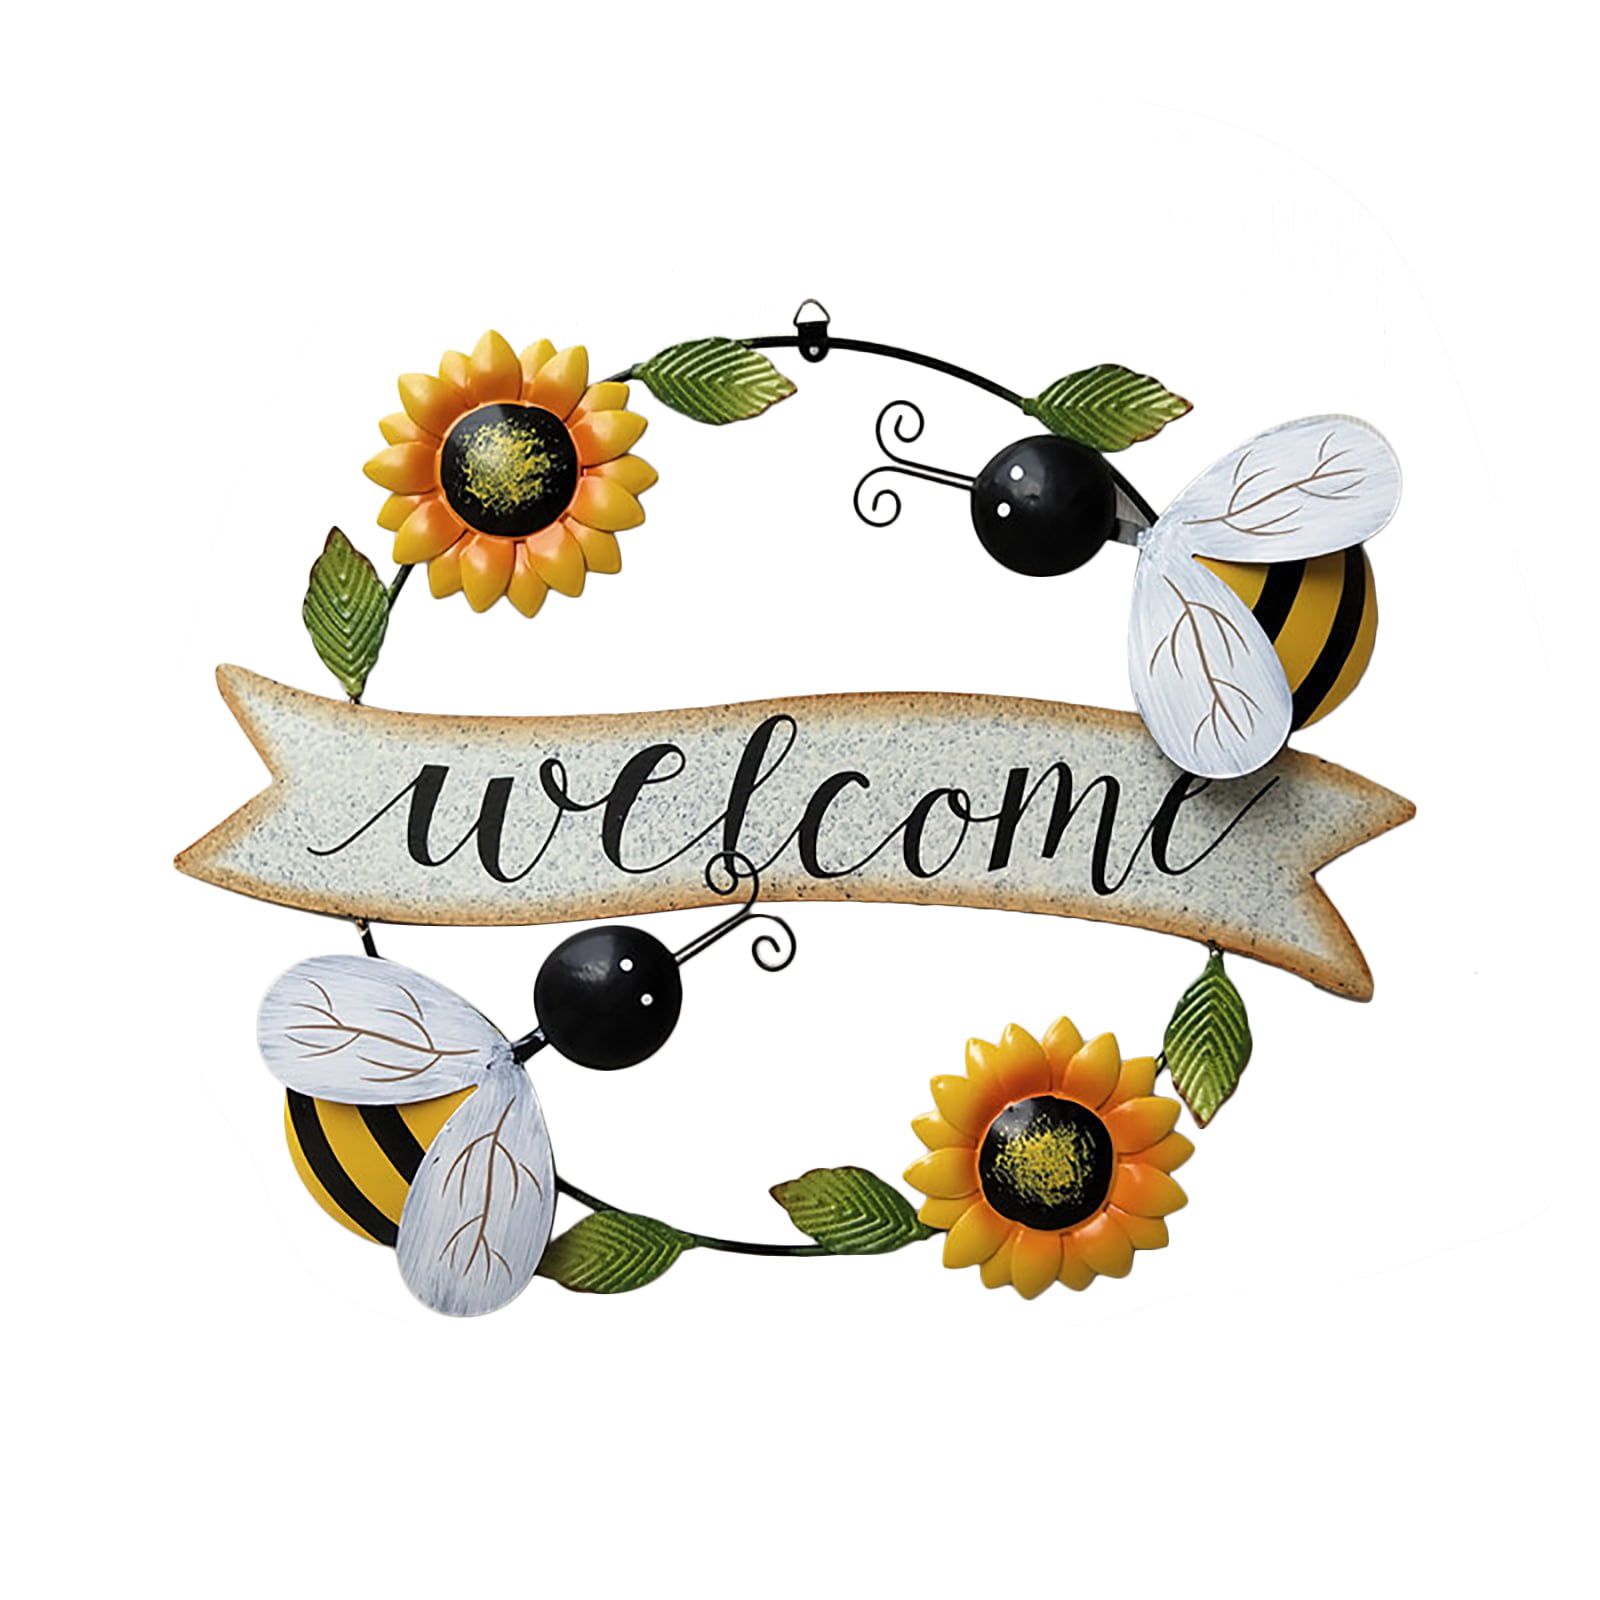 Sunflower Welcome Sign Decorative Vintage Metal Wall Hanging Home Garden  Decor – Welcome Plaque For Front Door, Garden Themed Sunflower & Butterfly  – Walmart Intended For Vintage Metal Welcome Sign Wall Art (View 5 of 15)